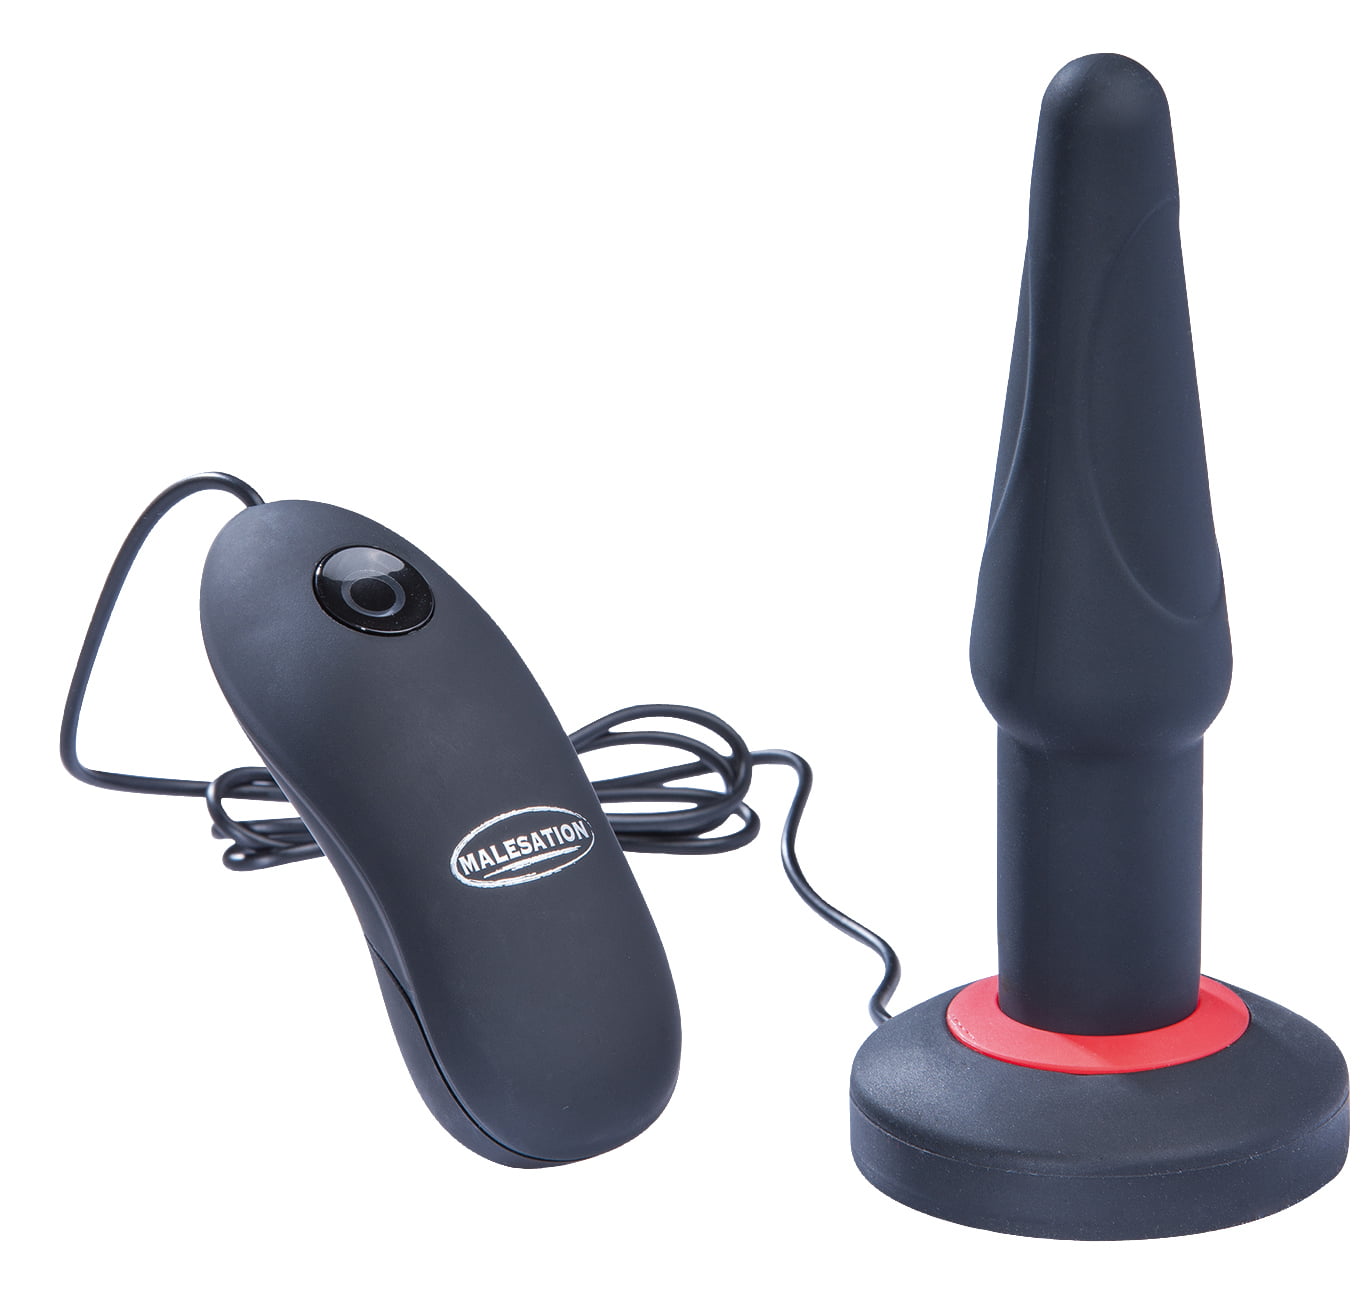 Malesation - Dual Layer Silicone Butt Plug met Vibratie - Small